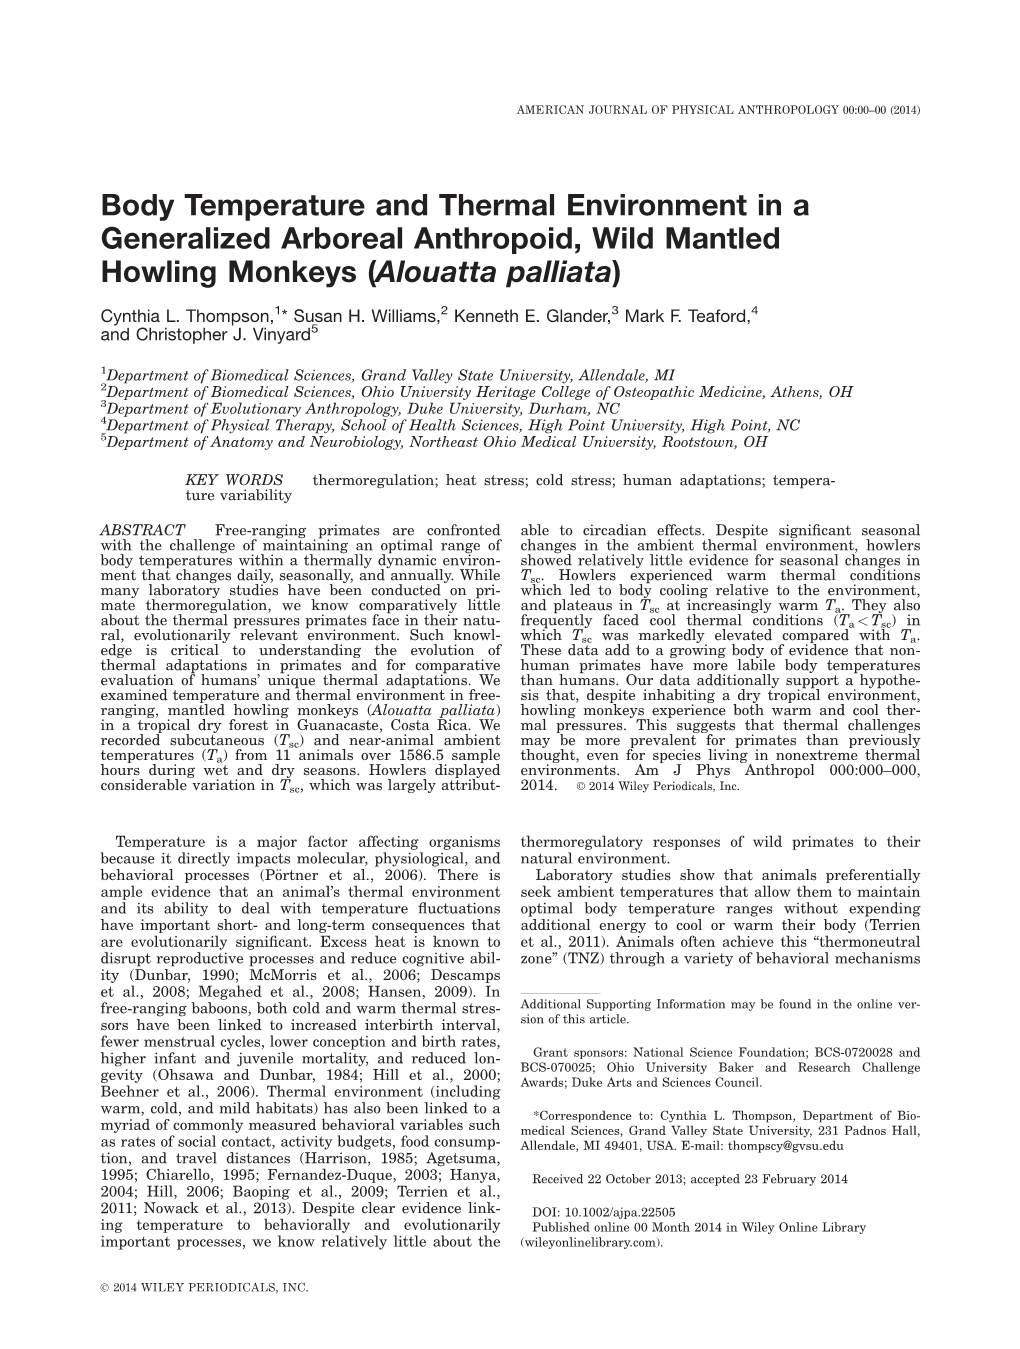 Body Temperature and Thermal Environment in a Generalized Arboreal Anthropoid, Wild Mantled Howling Monkeys (Alouatta Palliata)